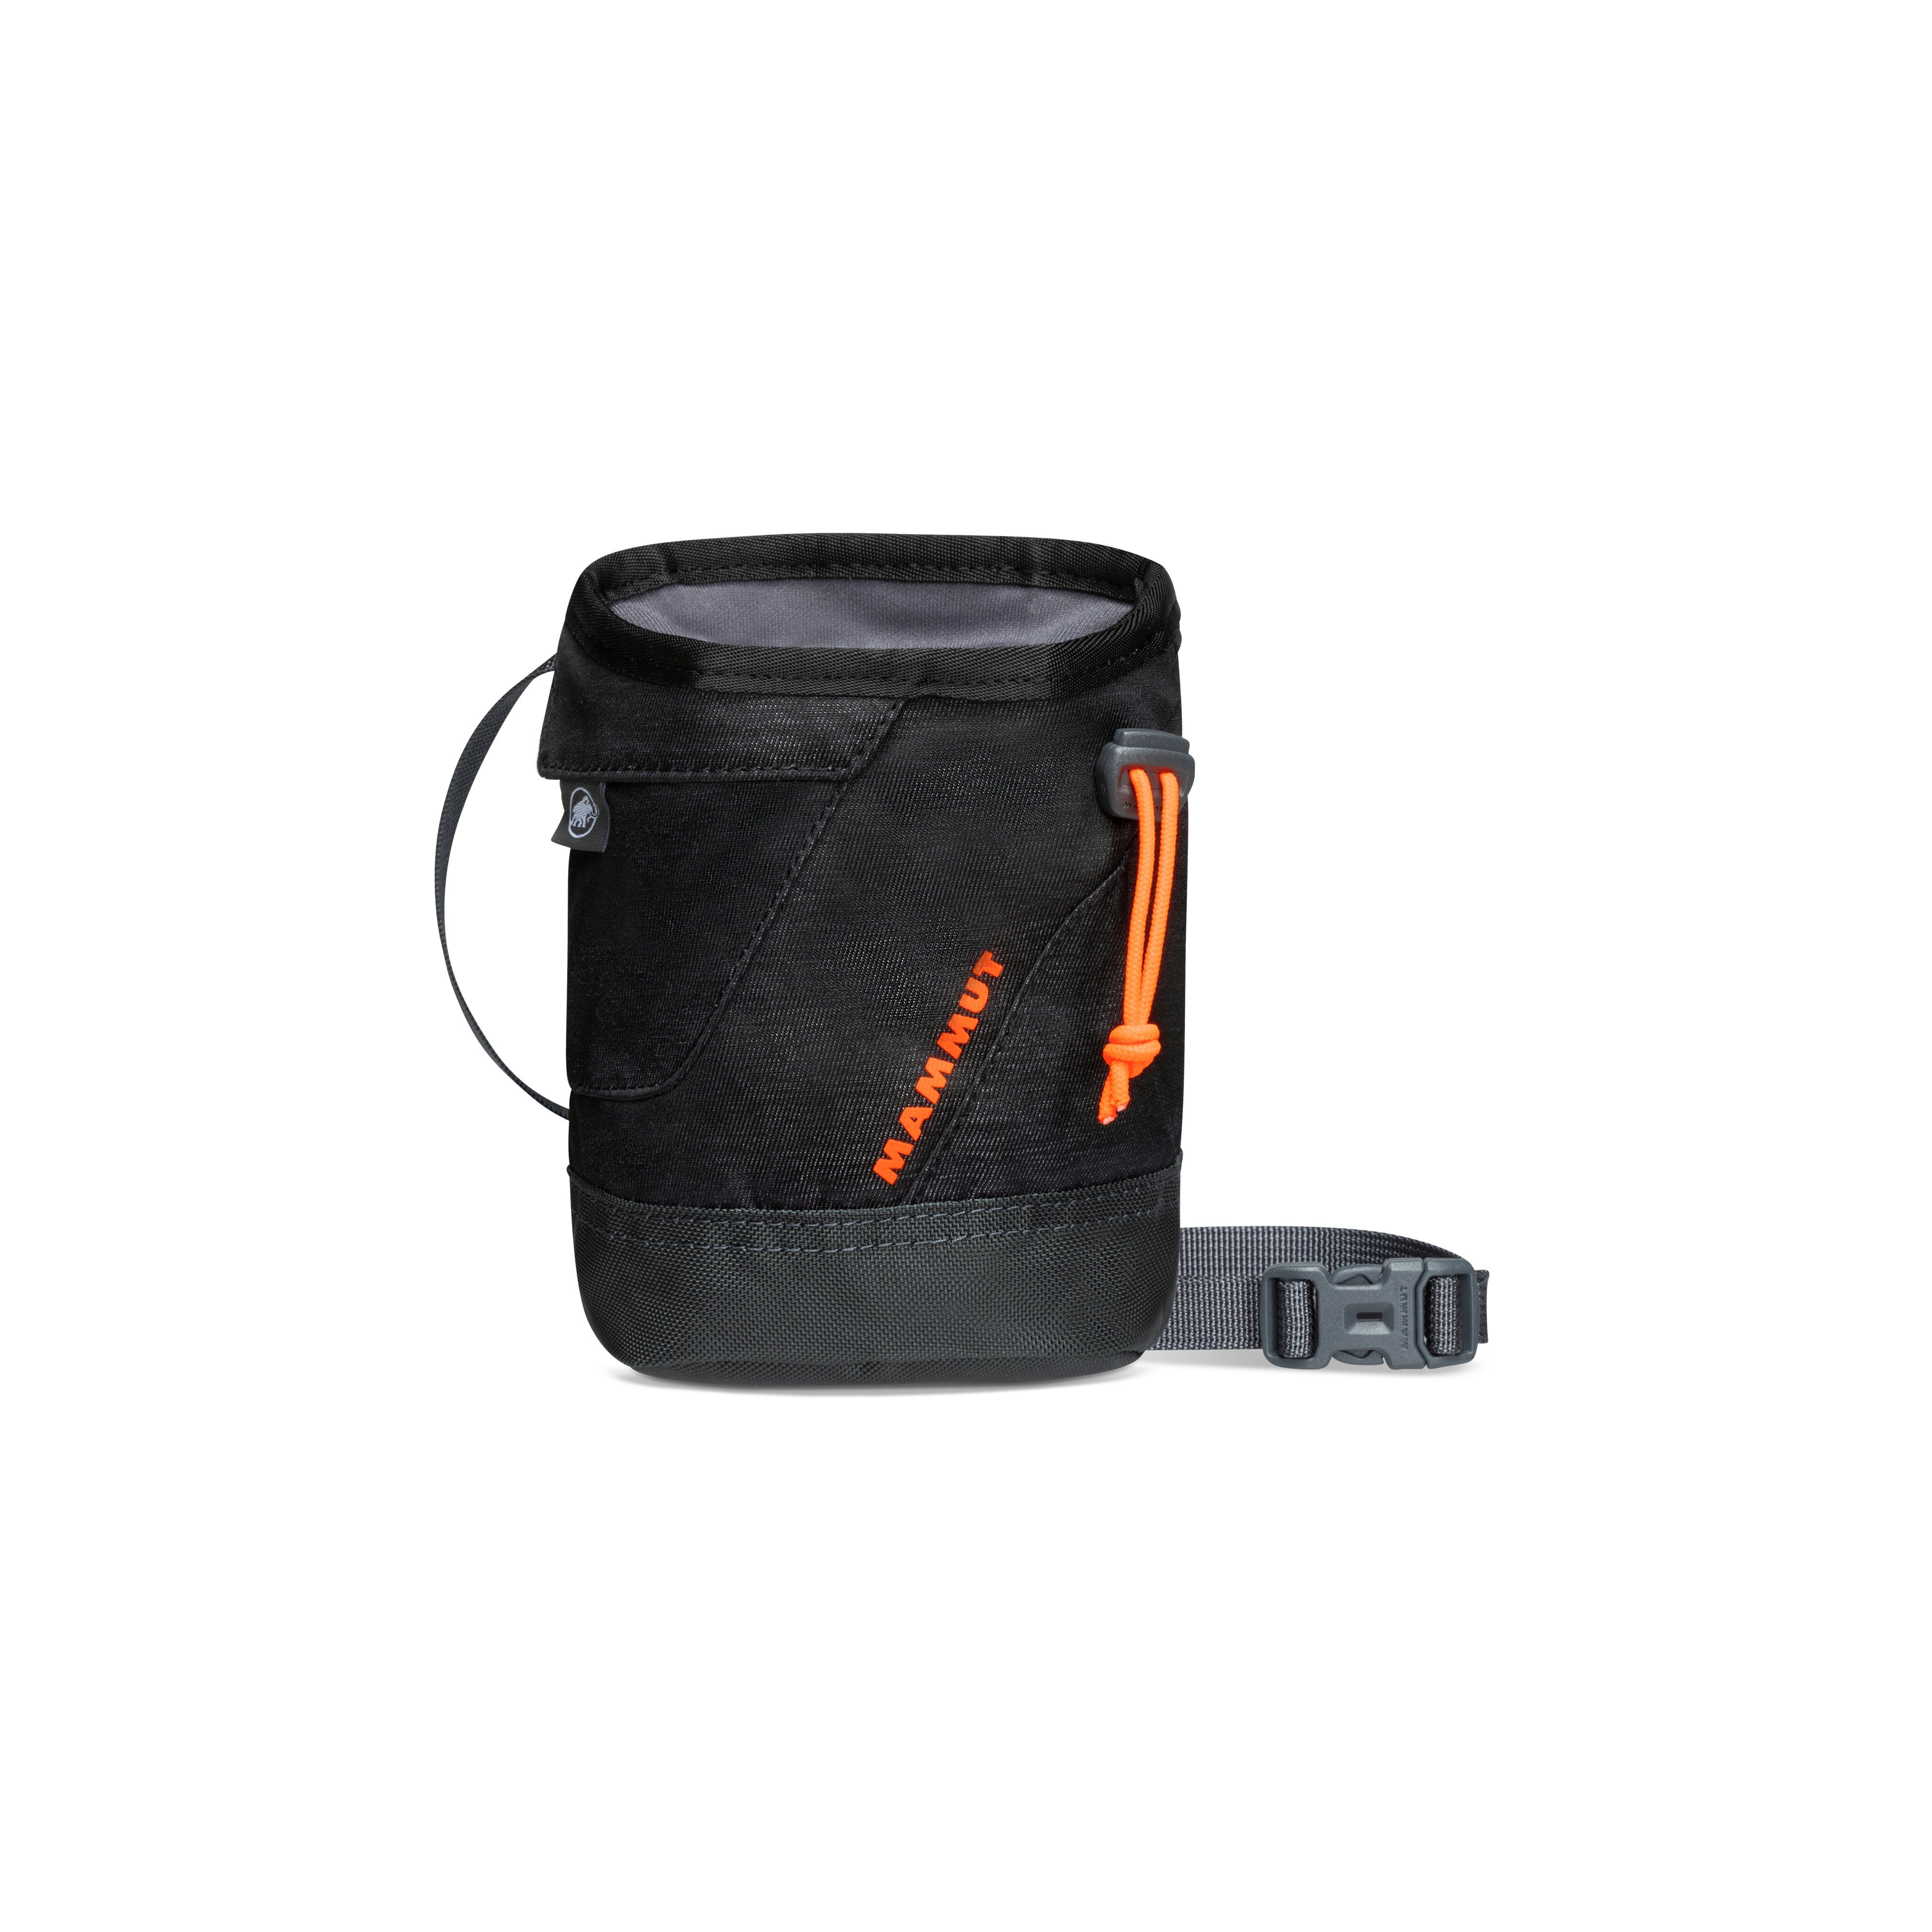 Ophir Chalk Bag - black, one size product image